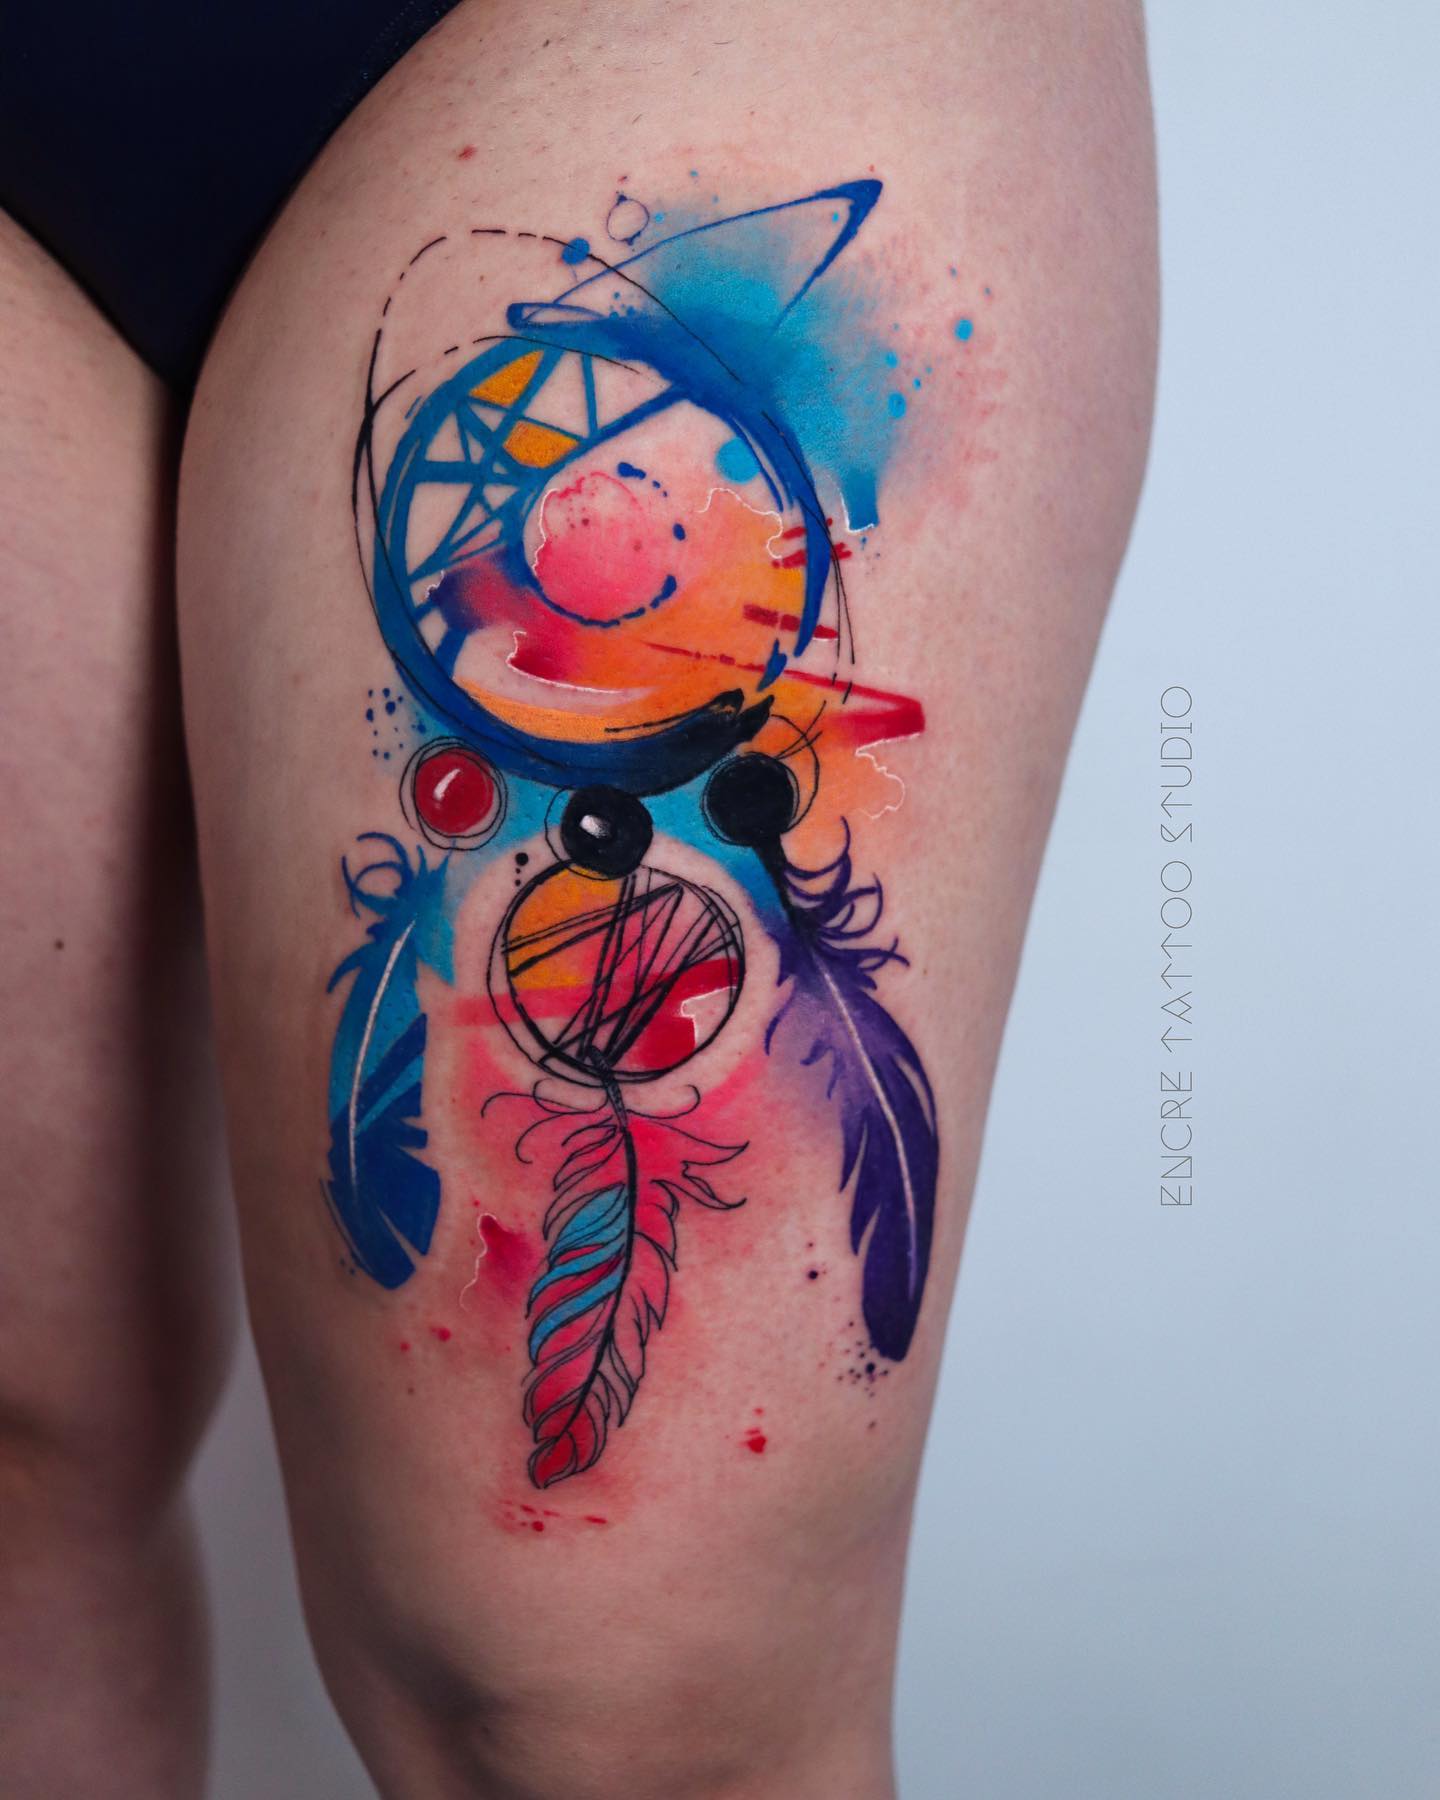 The dream catcher is a Native American symbol that represents protection and peace. Because of its strong symbolism, you should get it. A colorful and abstract dream catcher tattoo on the upper leg offers a very beautiful and feminine look.